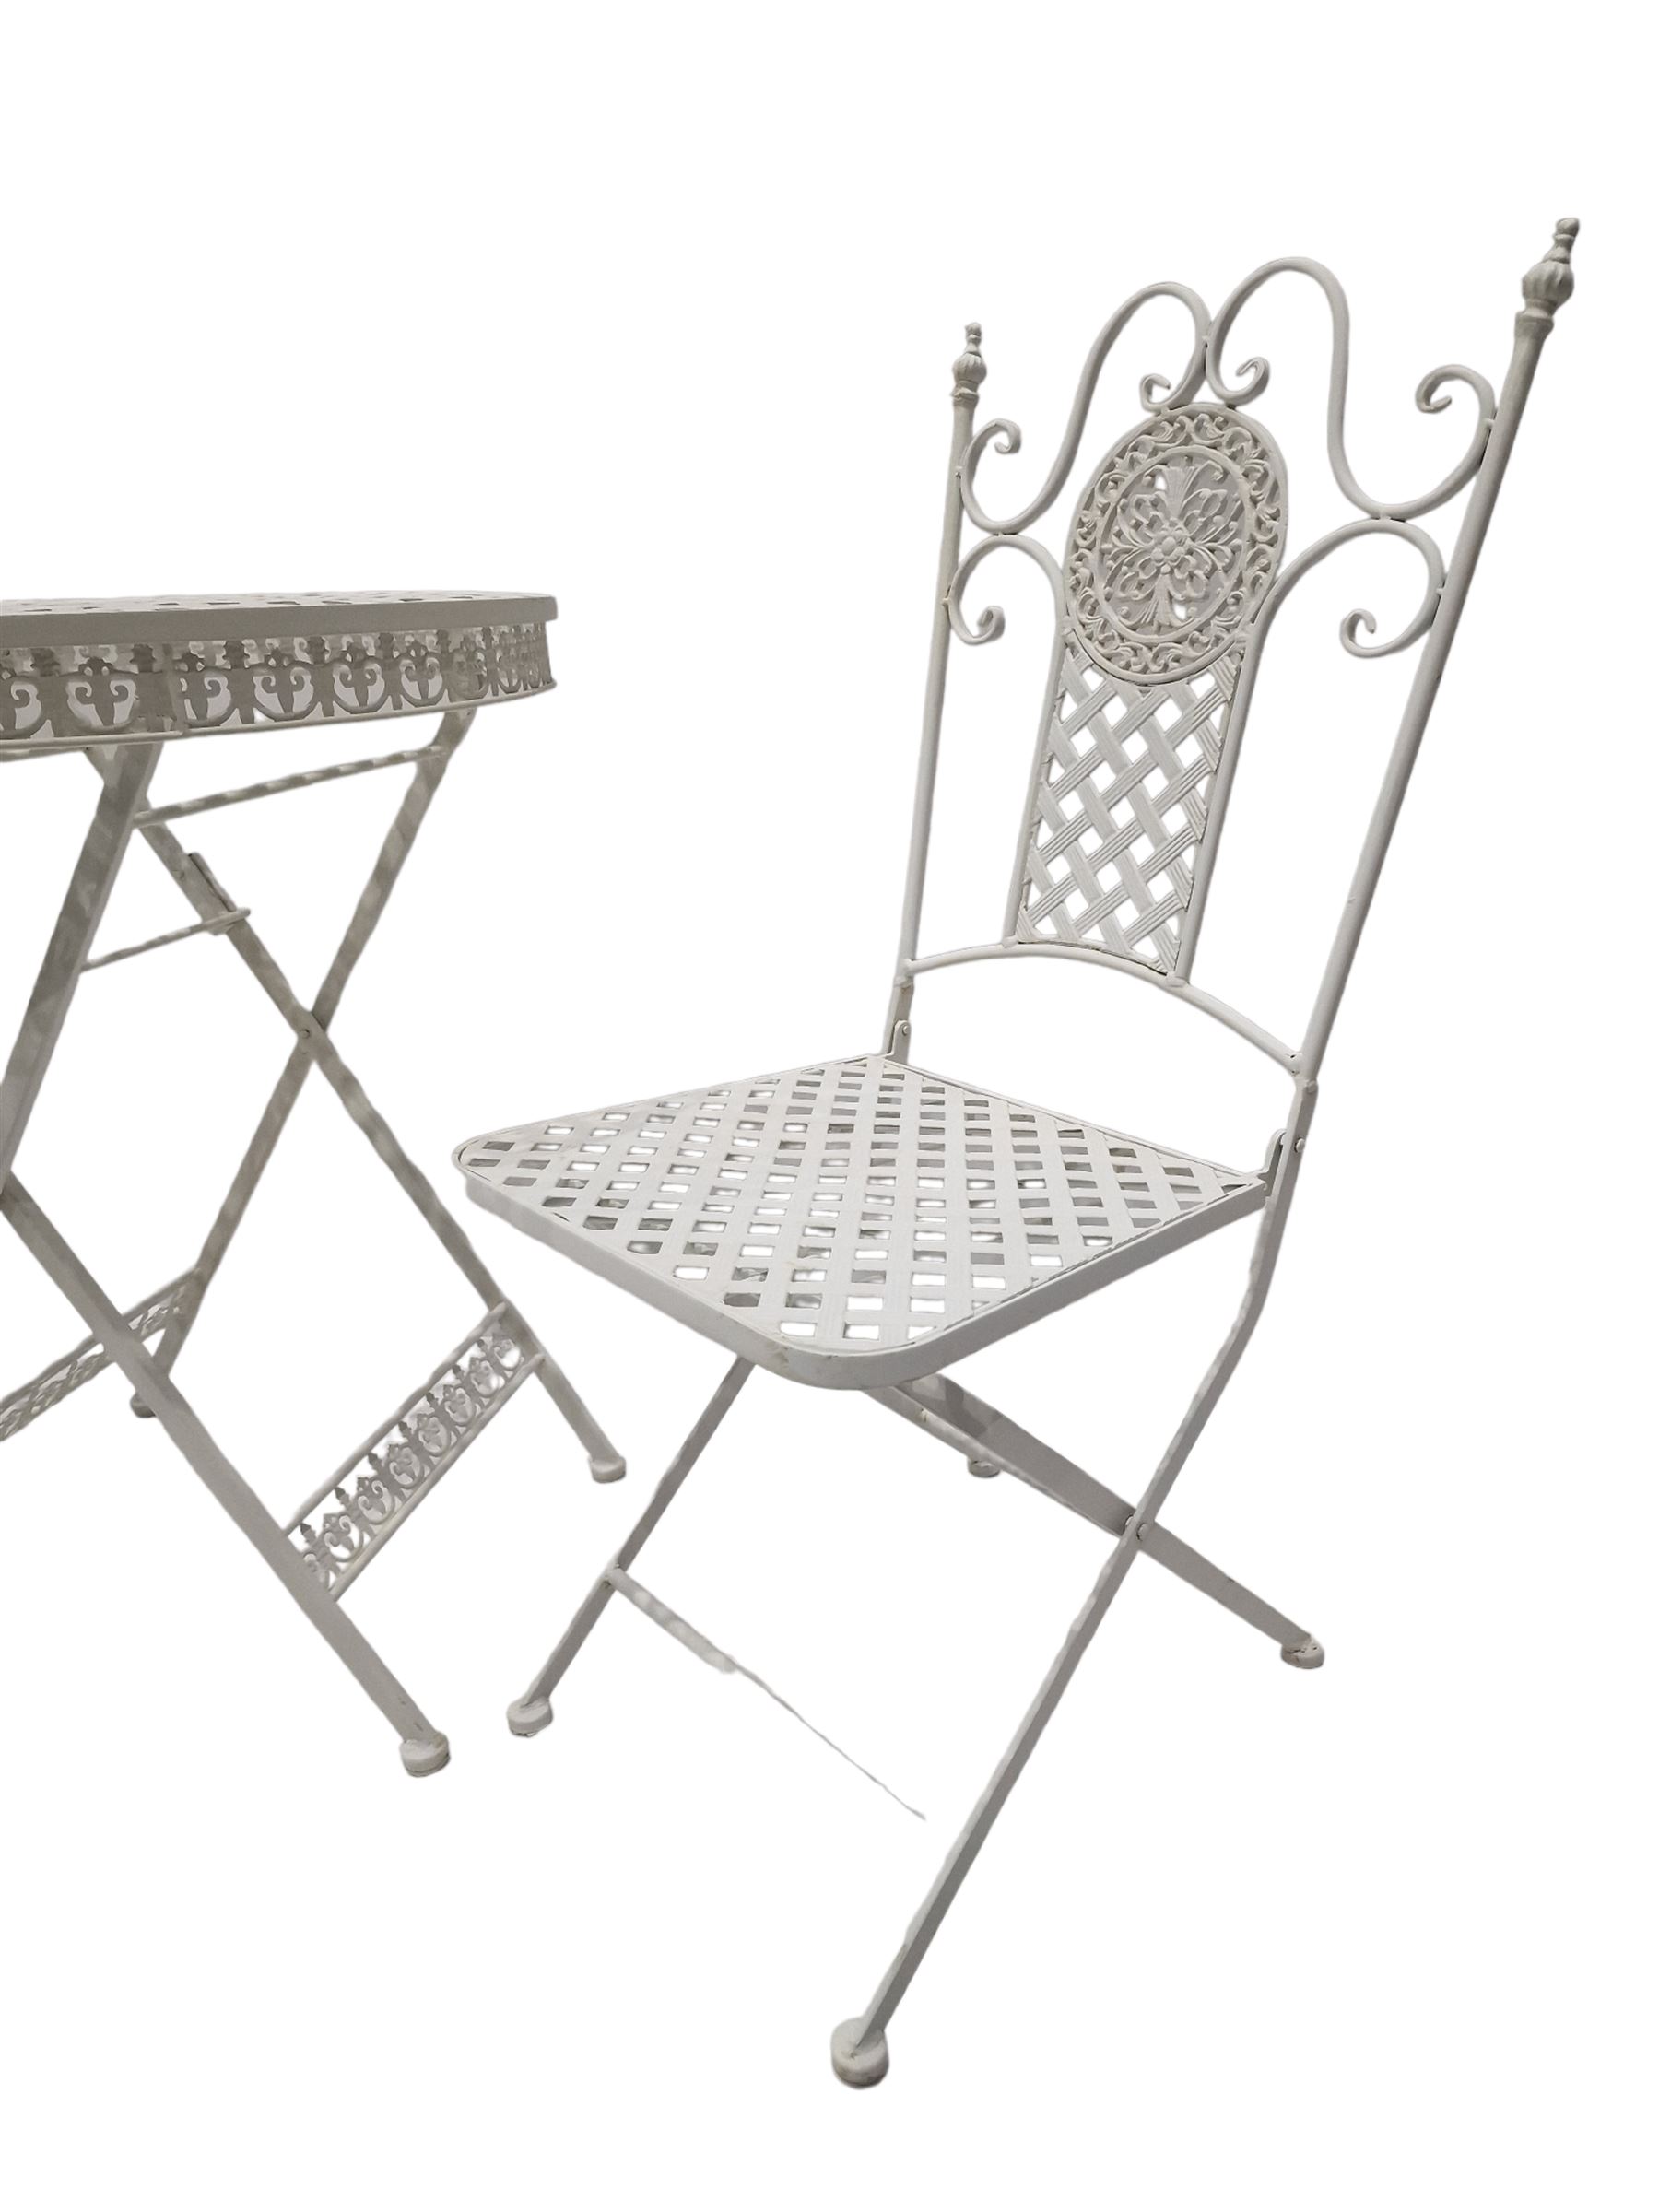 Wrought iron mesh style round bistro table and two chairs in white finish - THIS LOT IS TO BE COLLE - Image 4 of 4